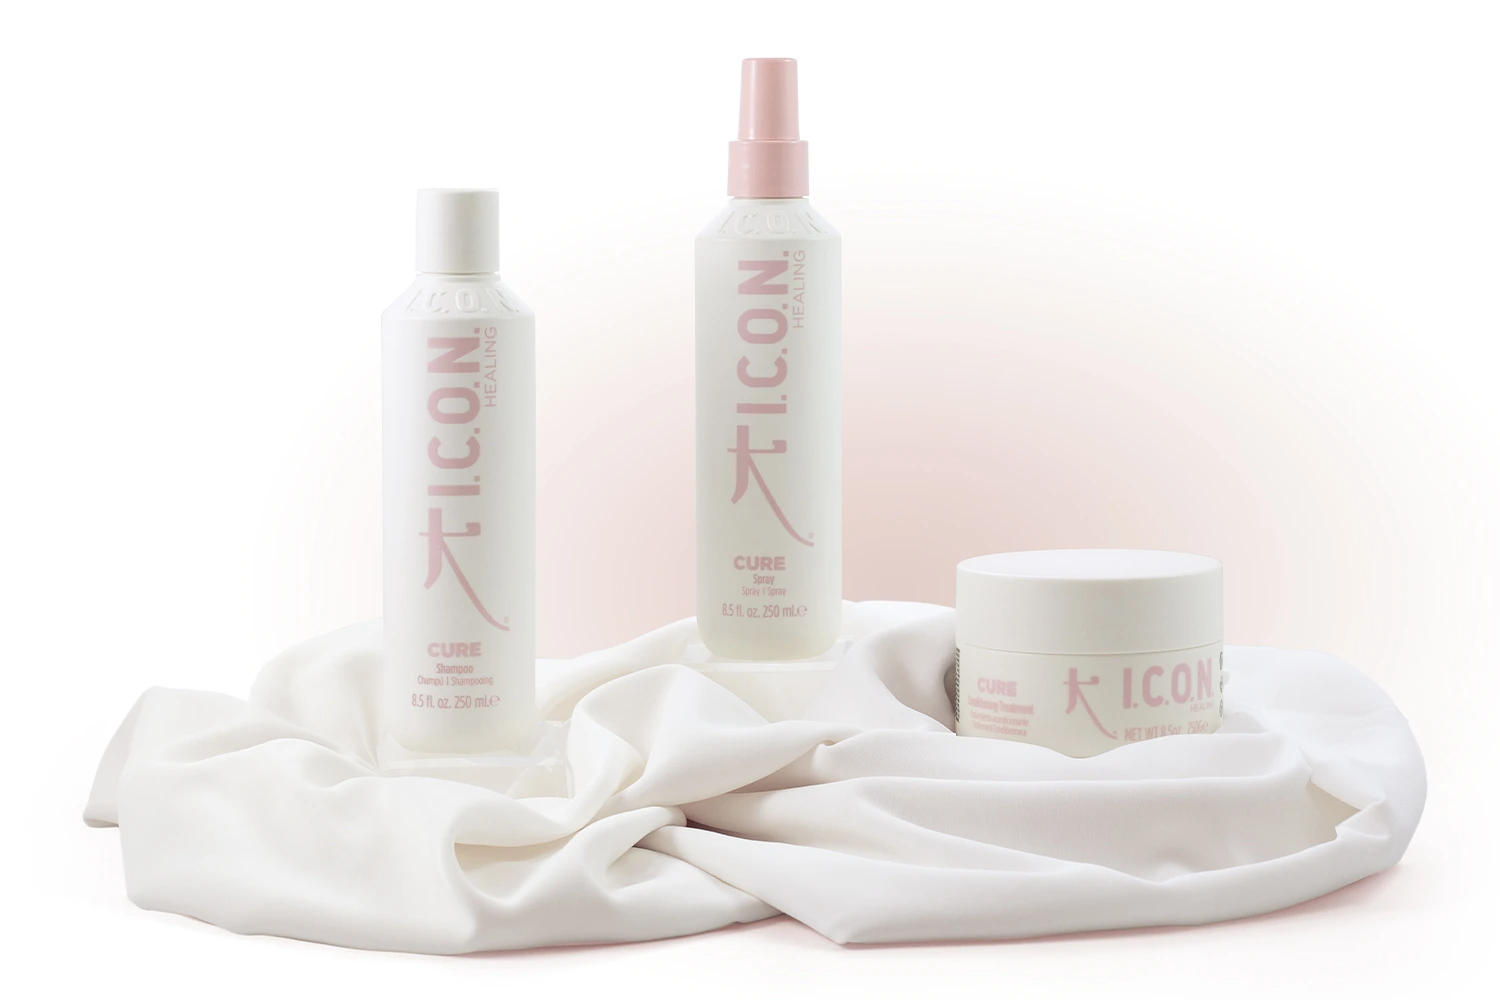 ICON Cure · Coserty Beauty Shop